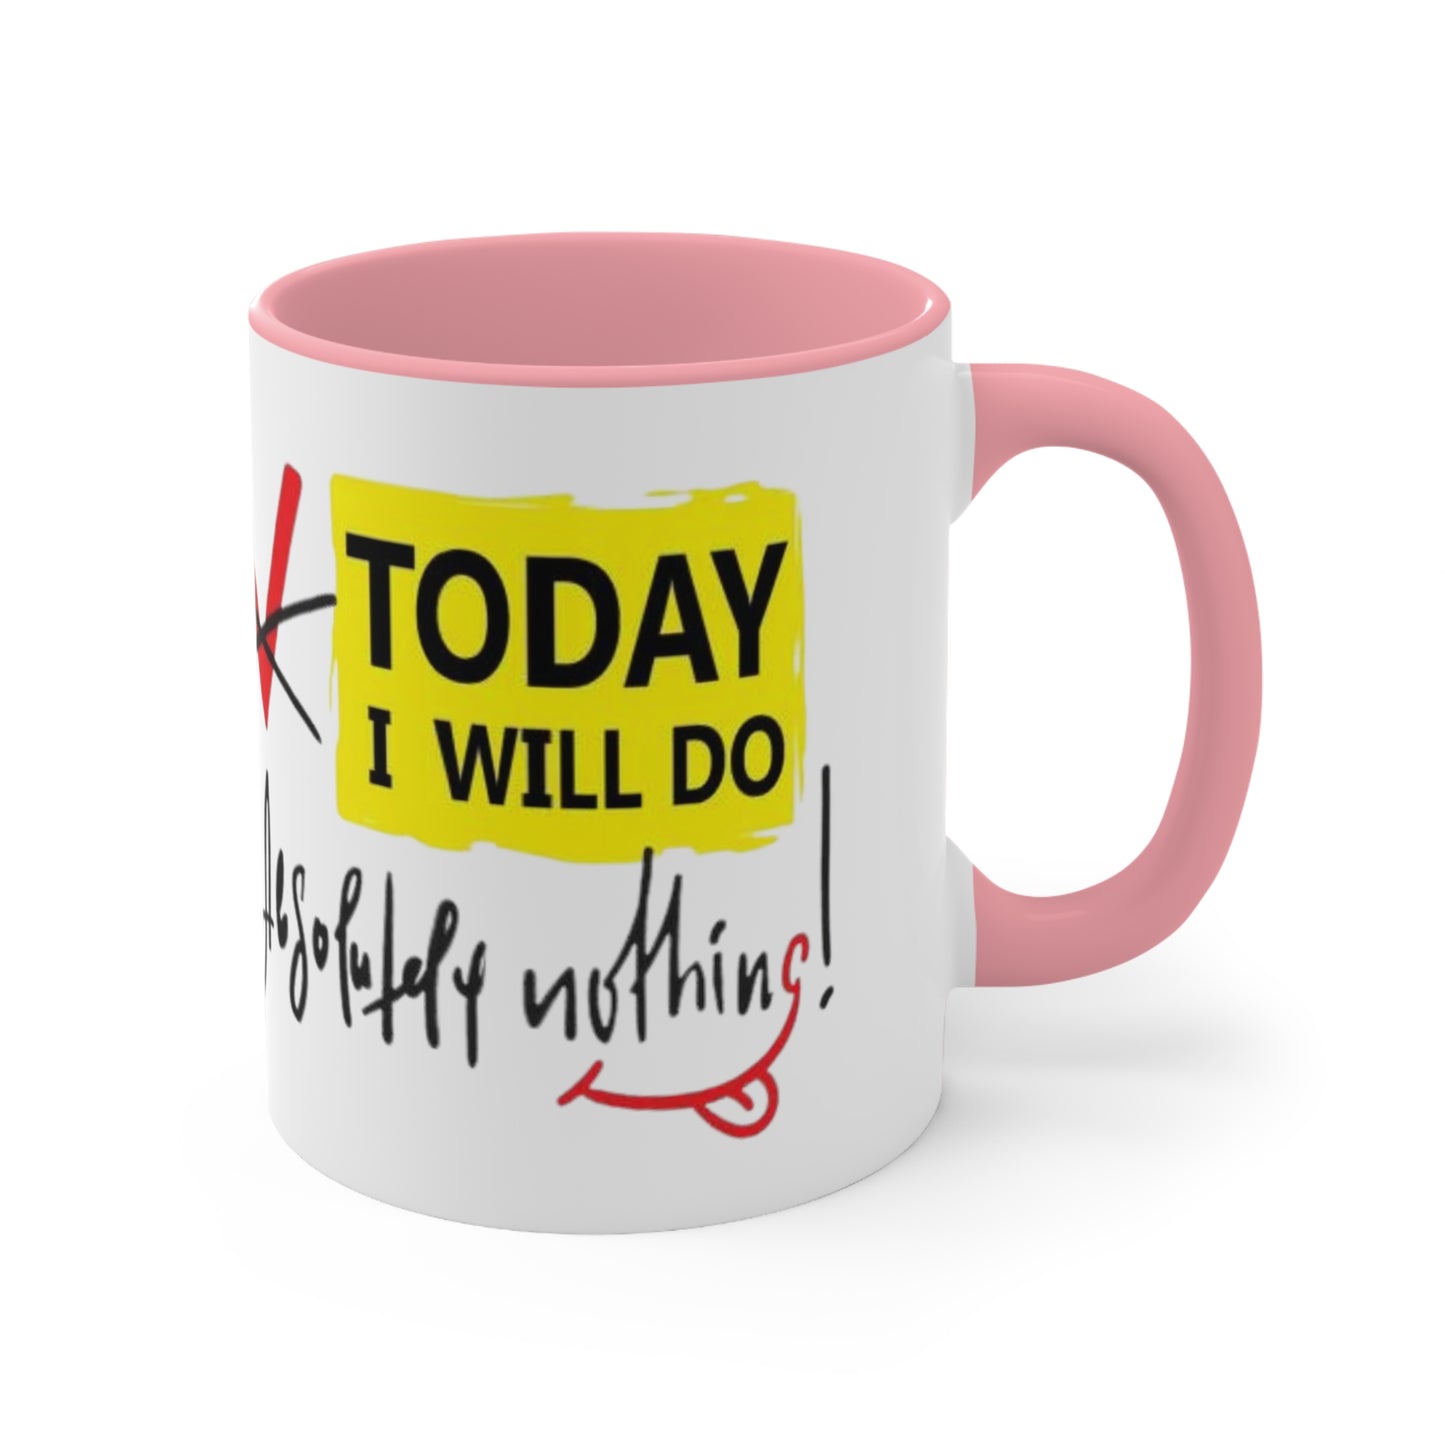 Today I Will Do Absolutely Nothing Ceramic Coffee Mug, teacher gift, coworker gift, unique gift, gift for mom, gift for dad, funny mug